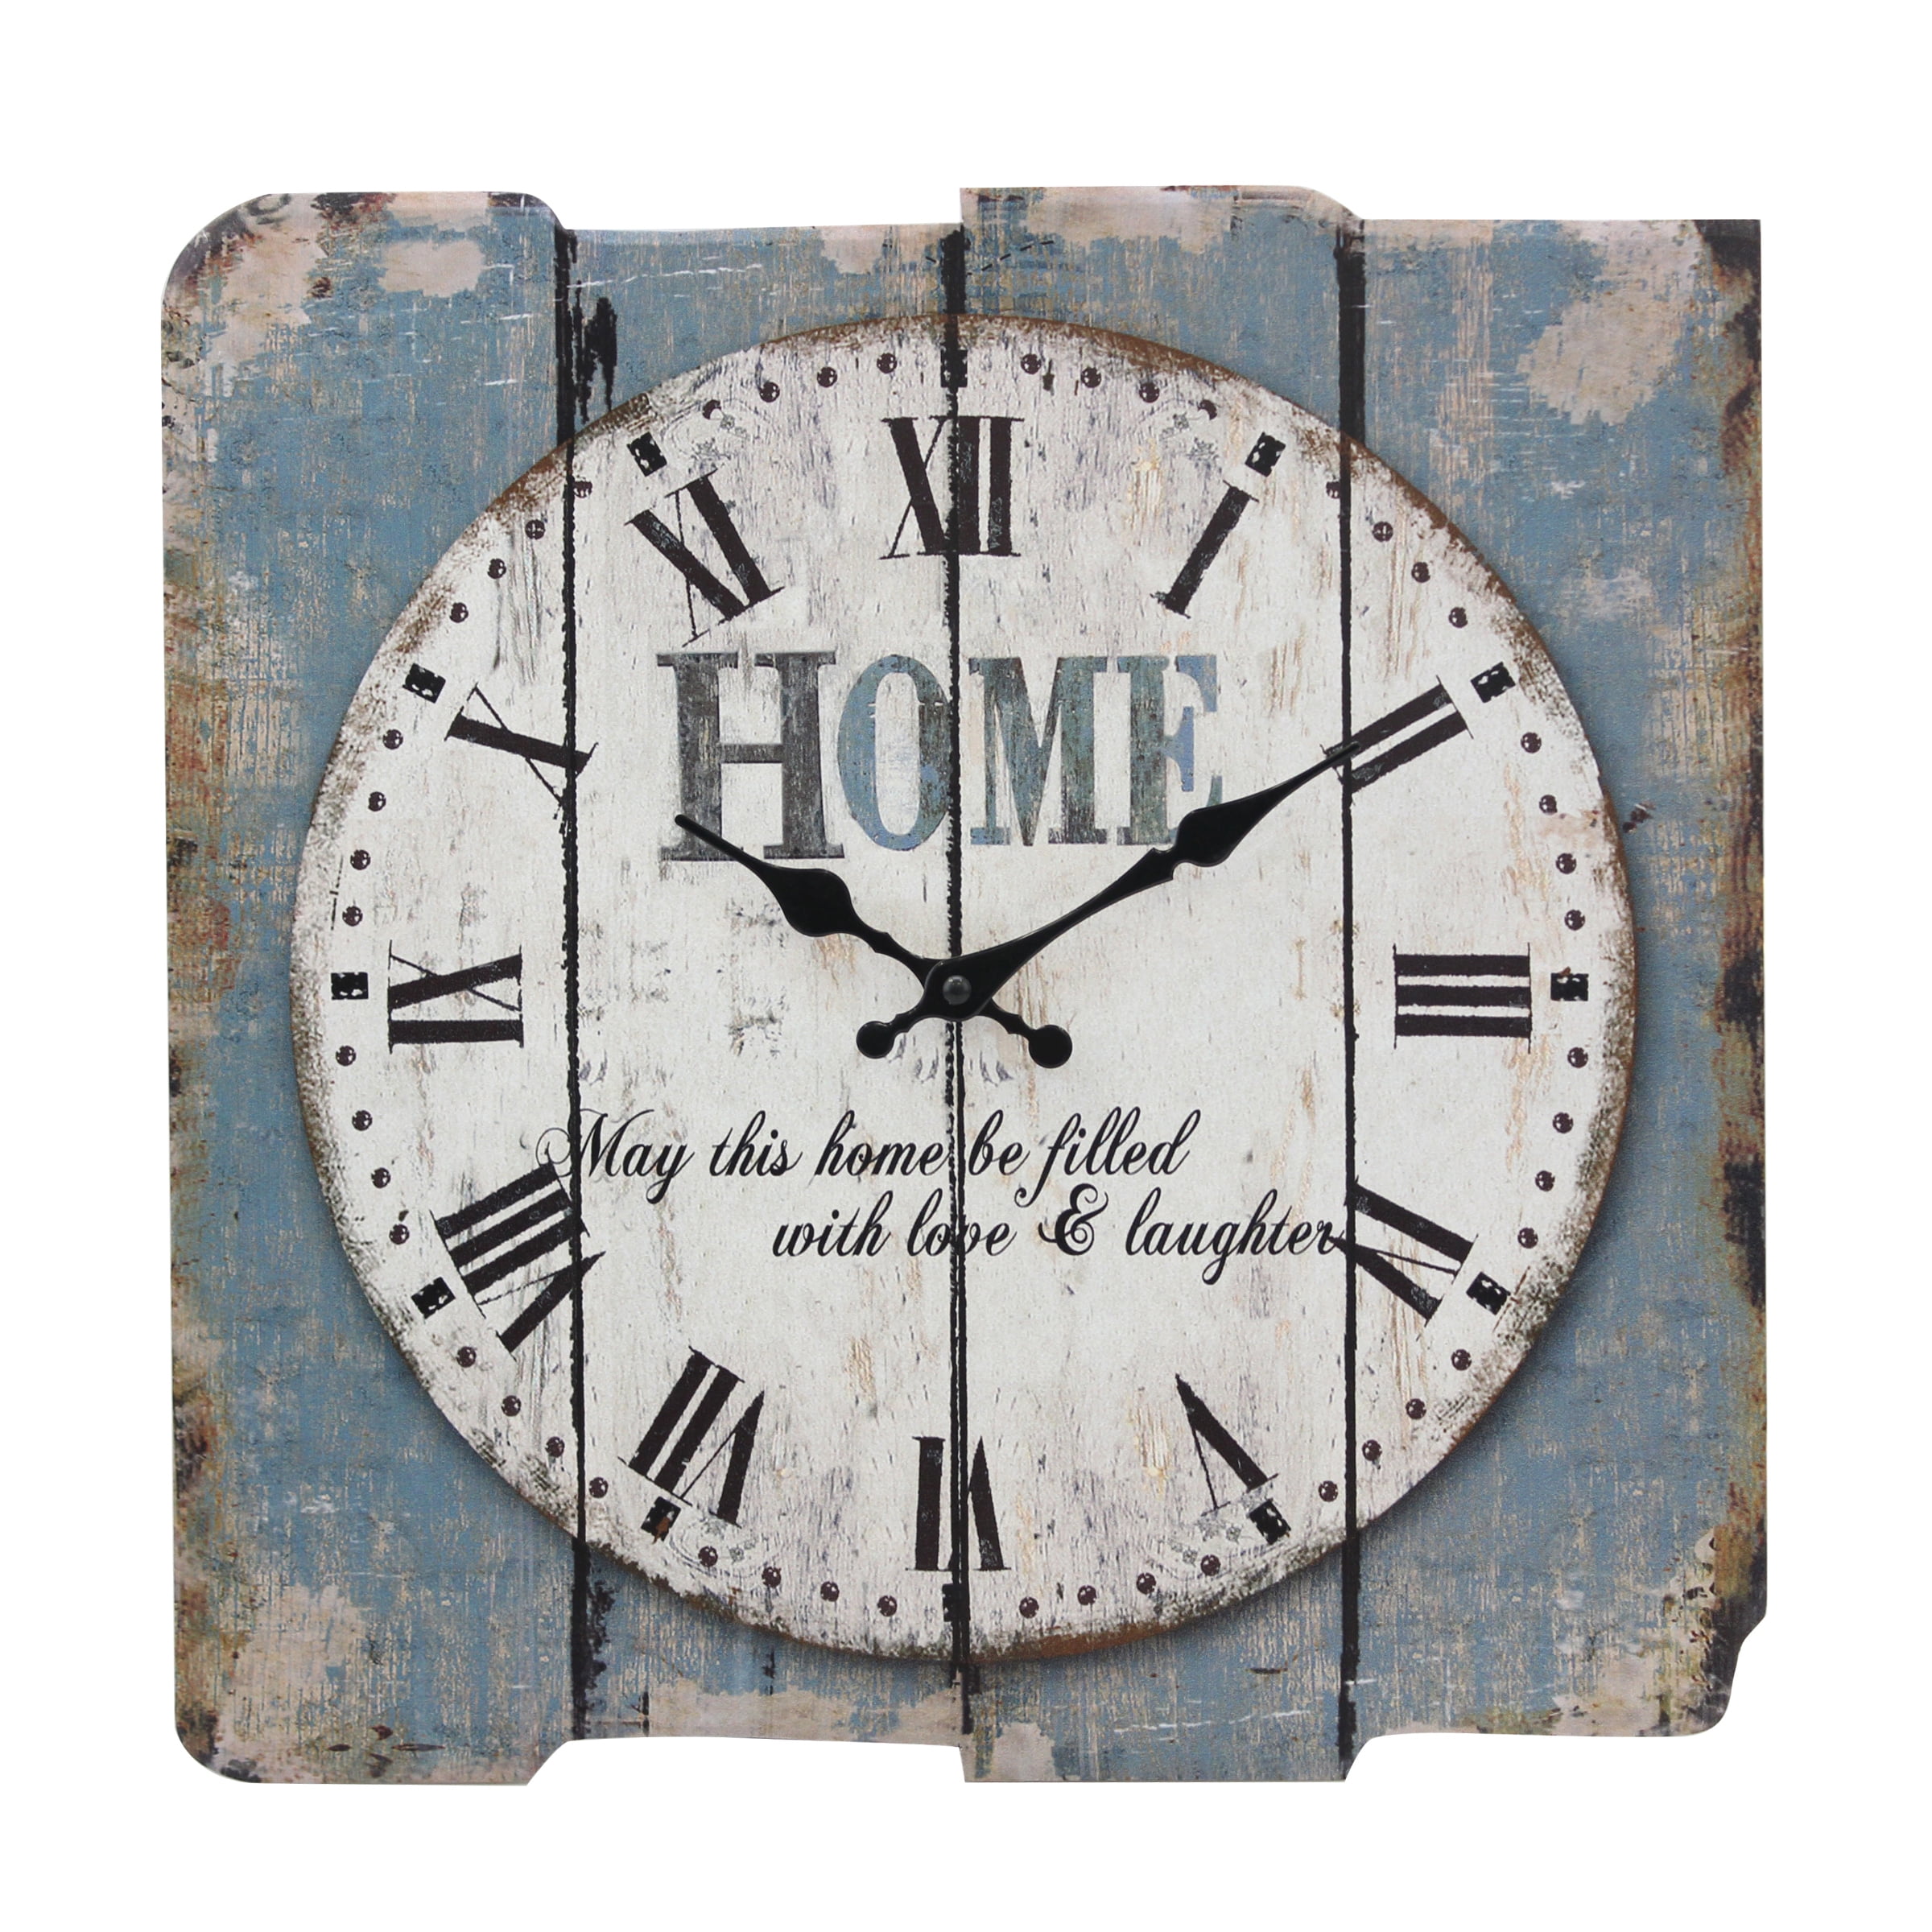 12 Inch Silver Square Wall Clock Digital Display Battery Operation Wall Clock Modern Silent Clock for Living Room Bedroom 